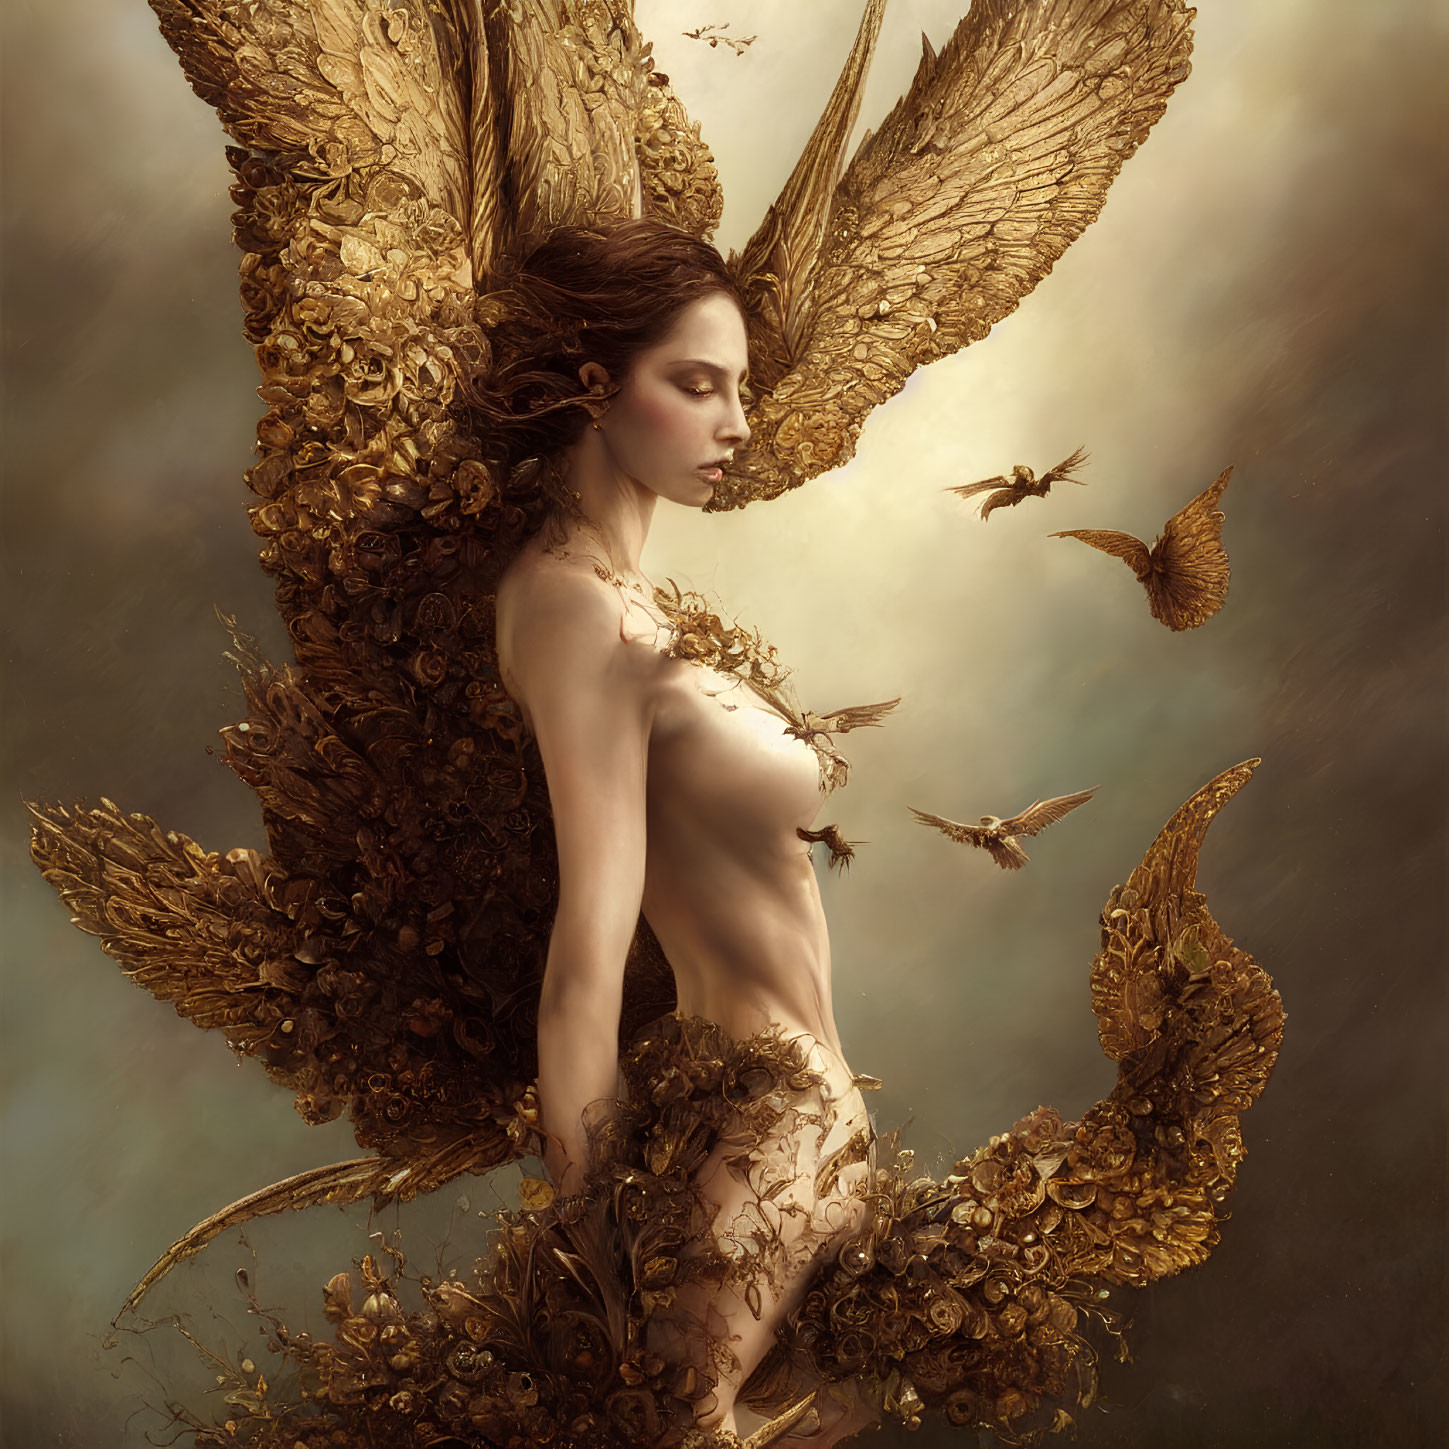 Golden-winged figure surrounded by birds and floral patterns symbolizes ethereal beauty.